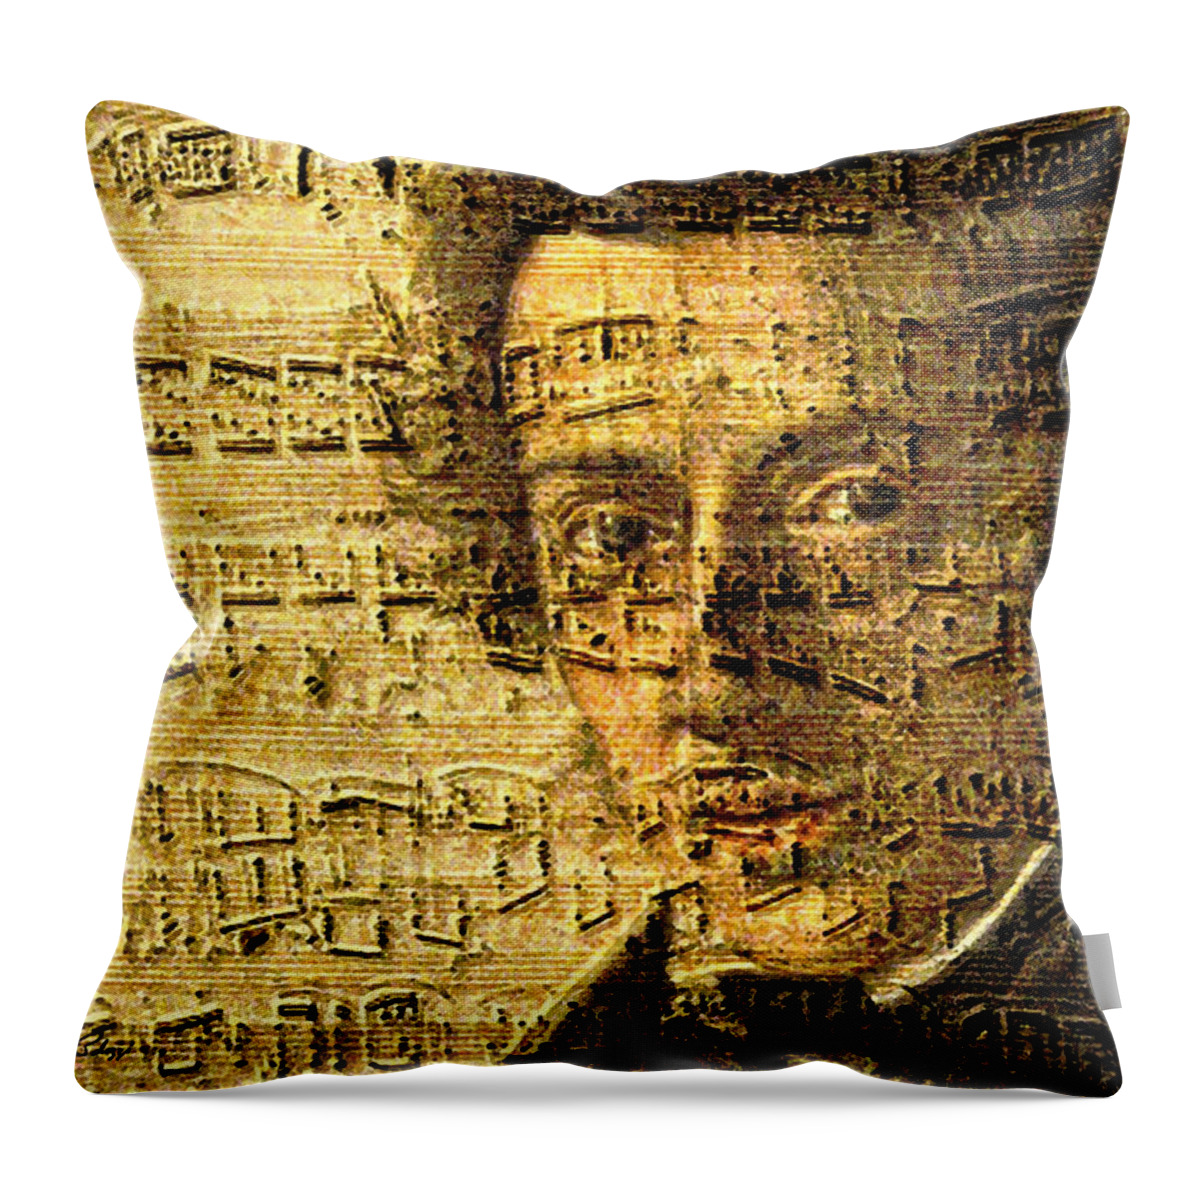 Classical Music Throw Pillow featuring the digital art Frederic Chopin by John Vincent Palozzi